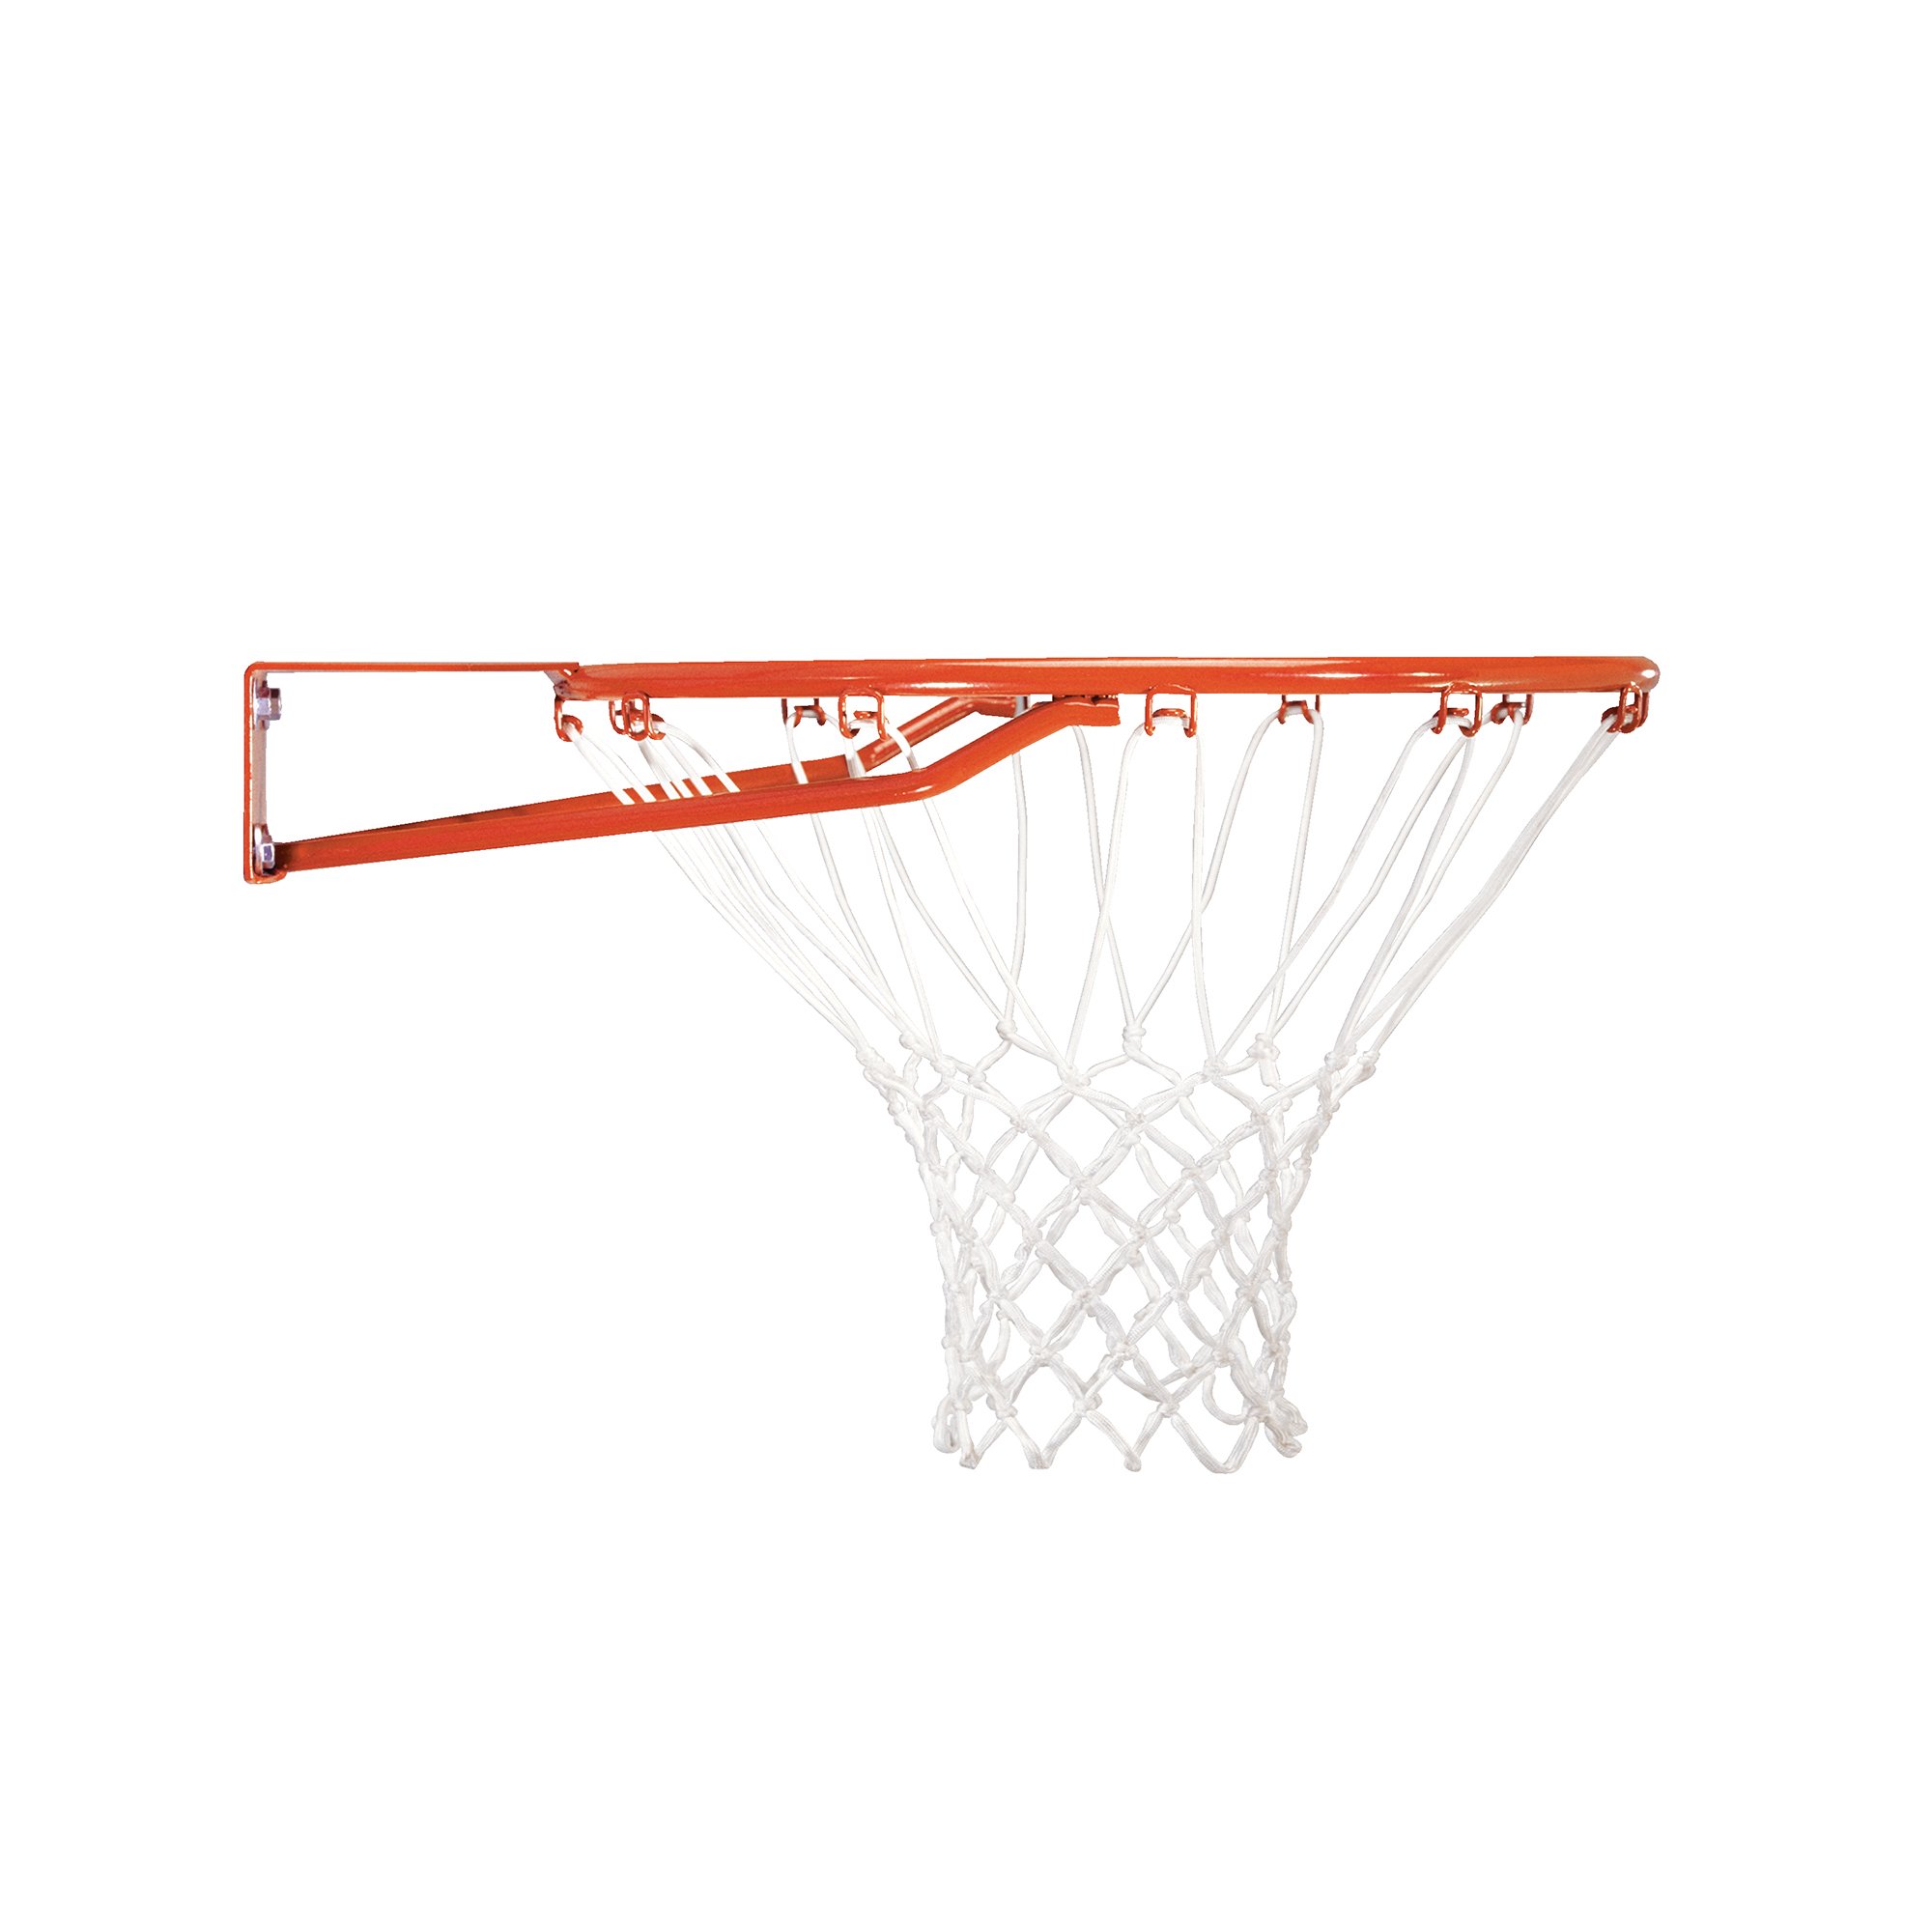 Pro Court Height Adjustable Portable Basketball System, 44 Inch Backboard, Red/White